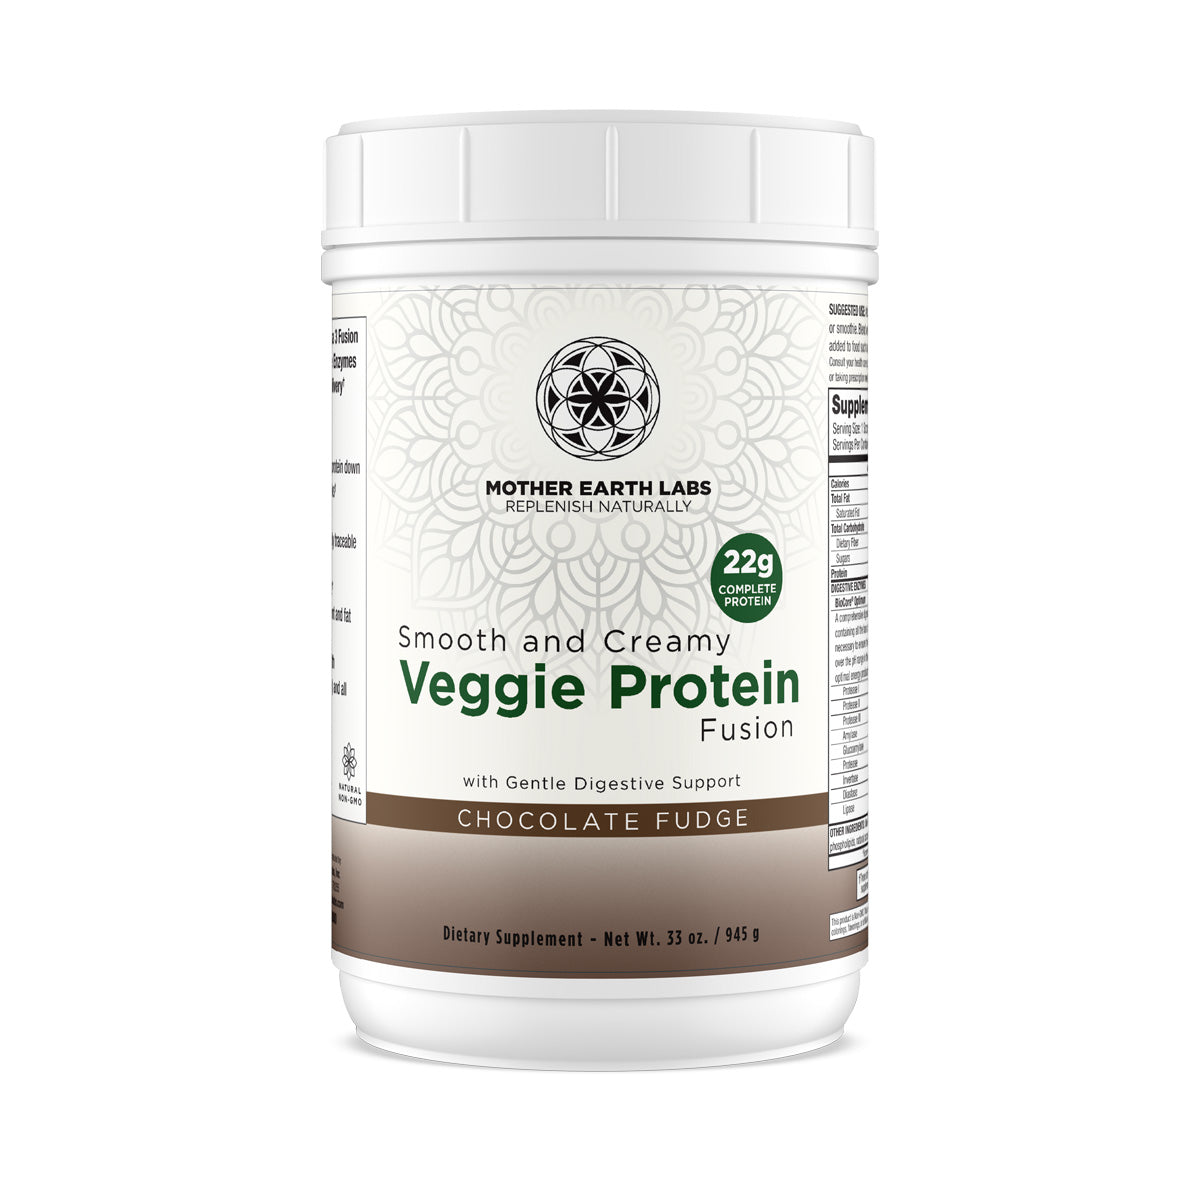 Veggie Fusion Protein (Chocolate Fudge Flavour) - 907g | Mother Earth Labs